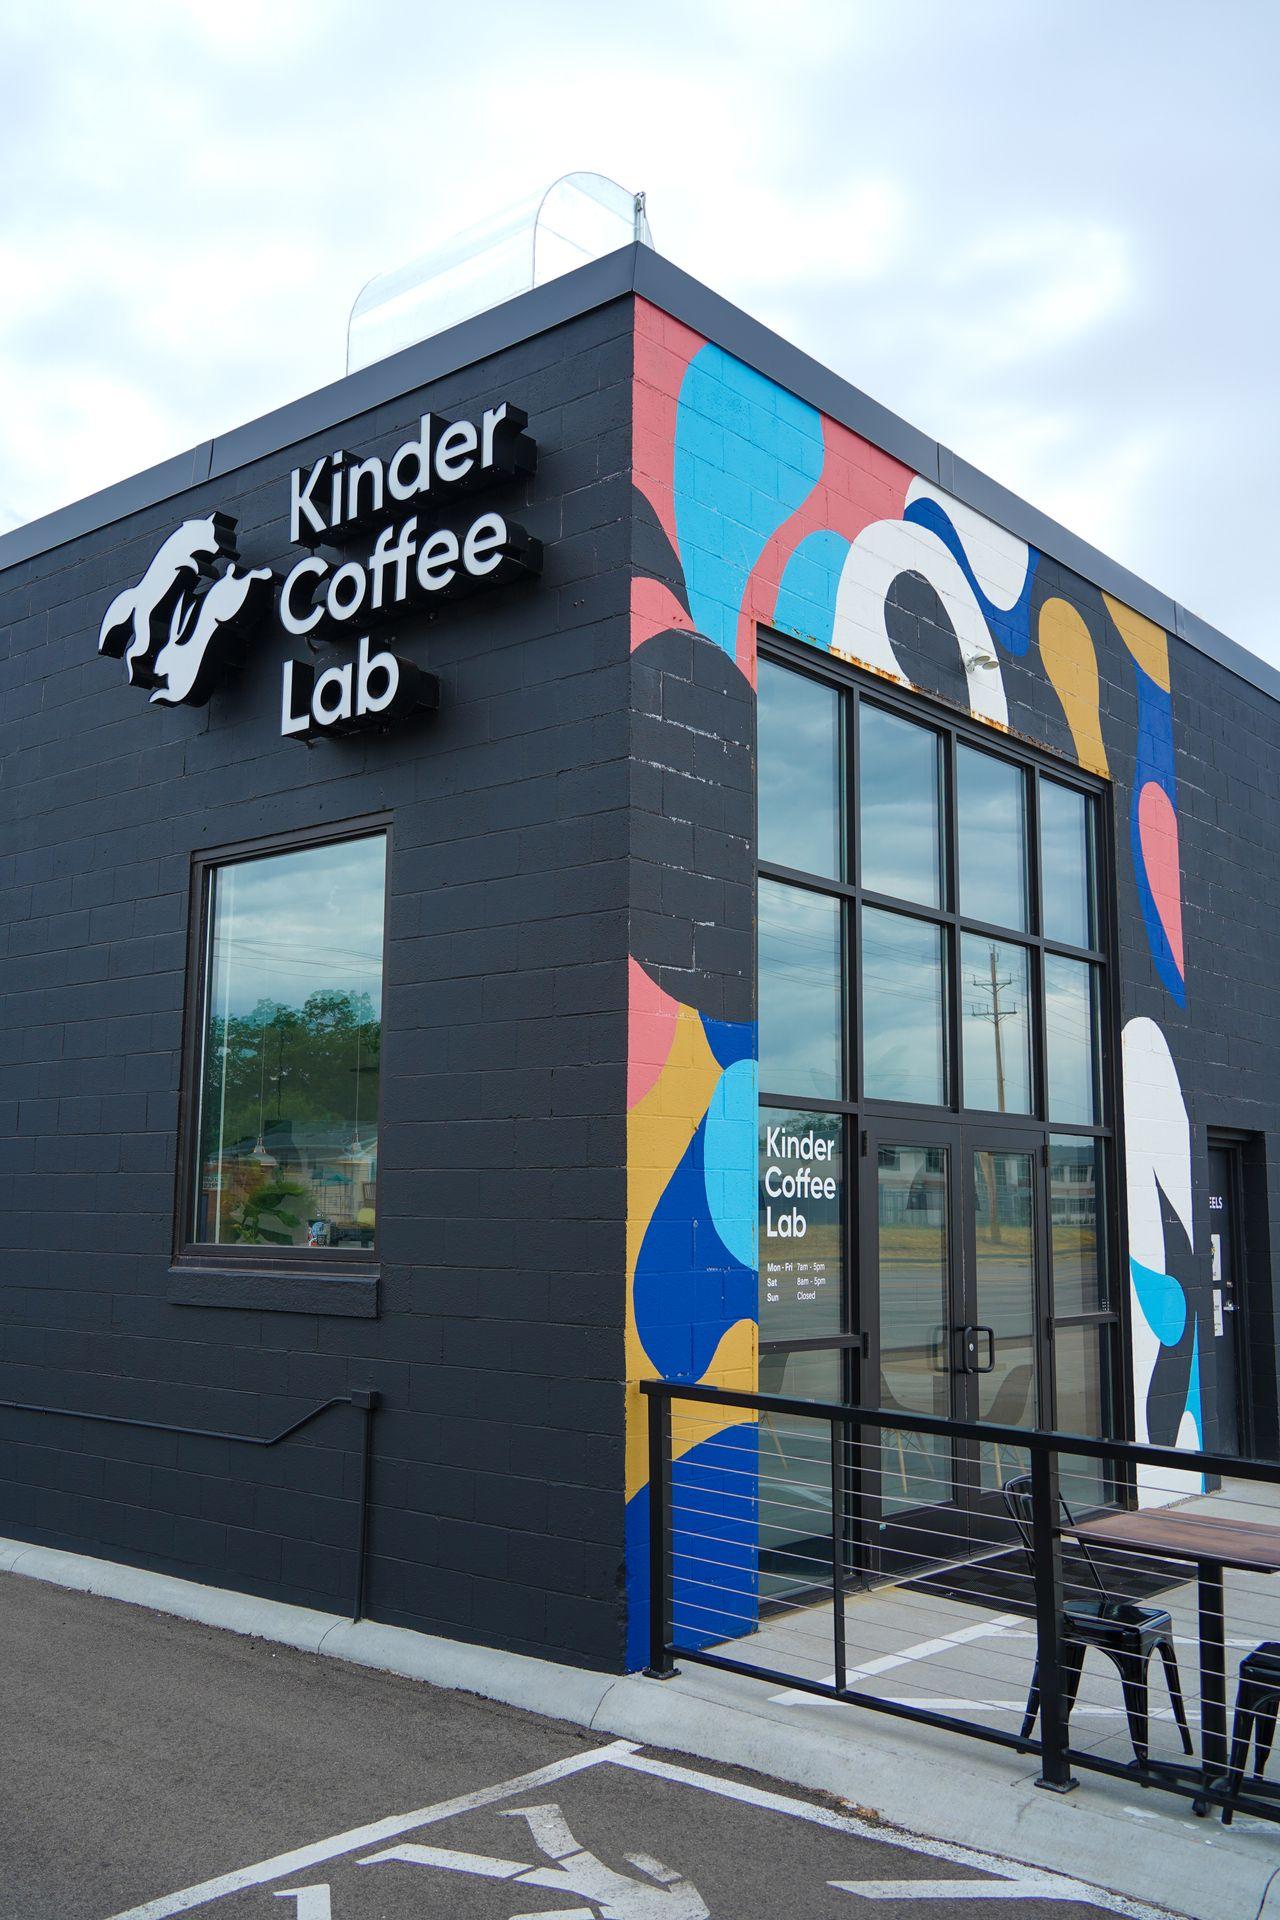 The exterior of Kinder Coffee Lab. The building is black on one side but has an abstract design with blue, yellow, pink and white on the other.